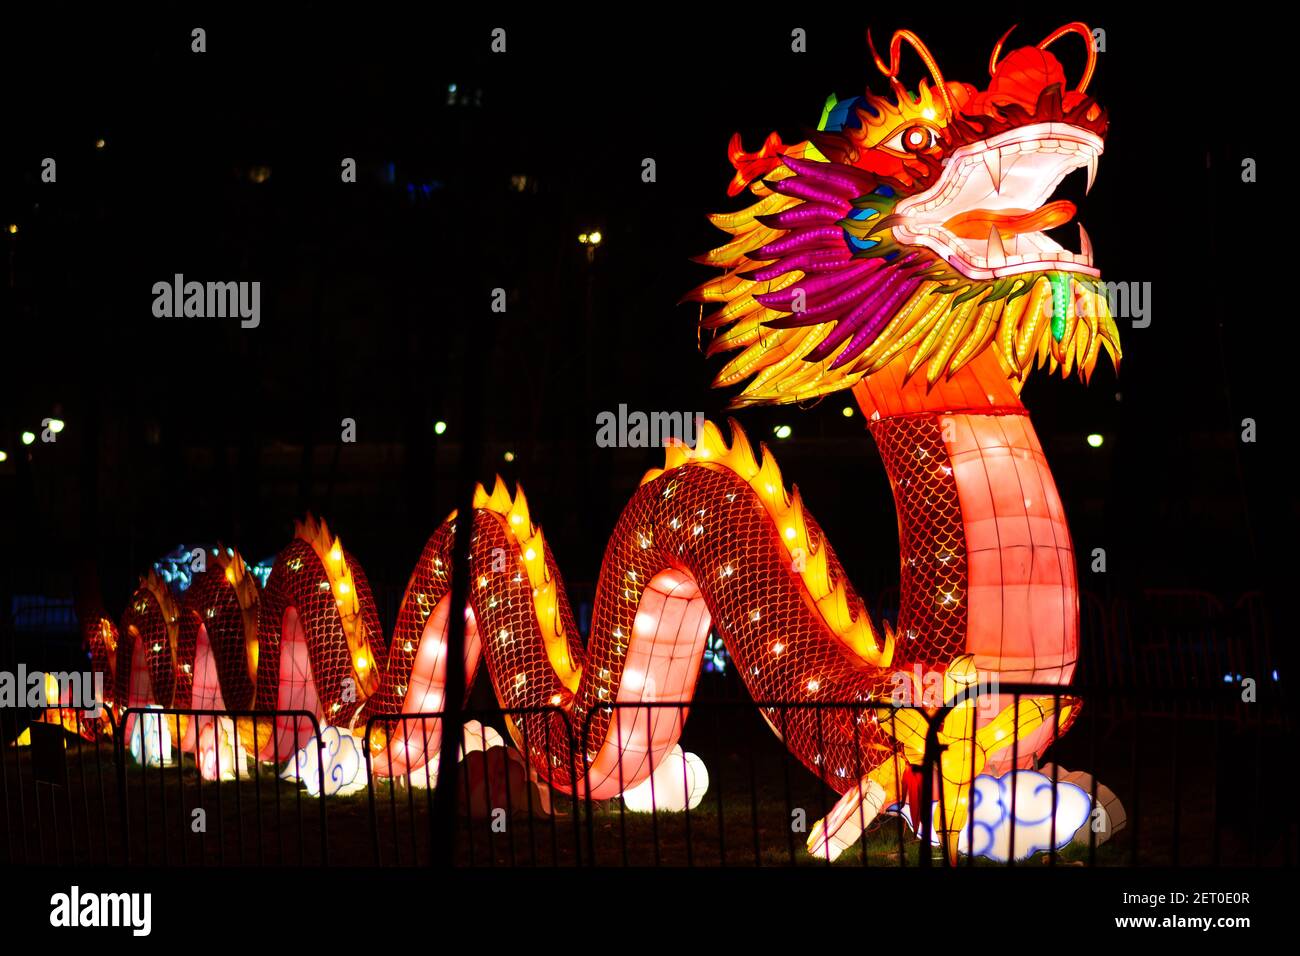 The Chinese Lantern Festival at the Limanski park. Full shot of The Chinese dragon from Chinese mythology. Stock Photo